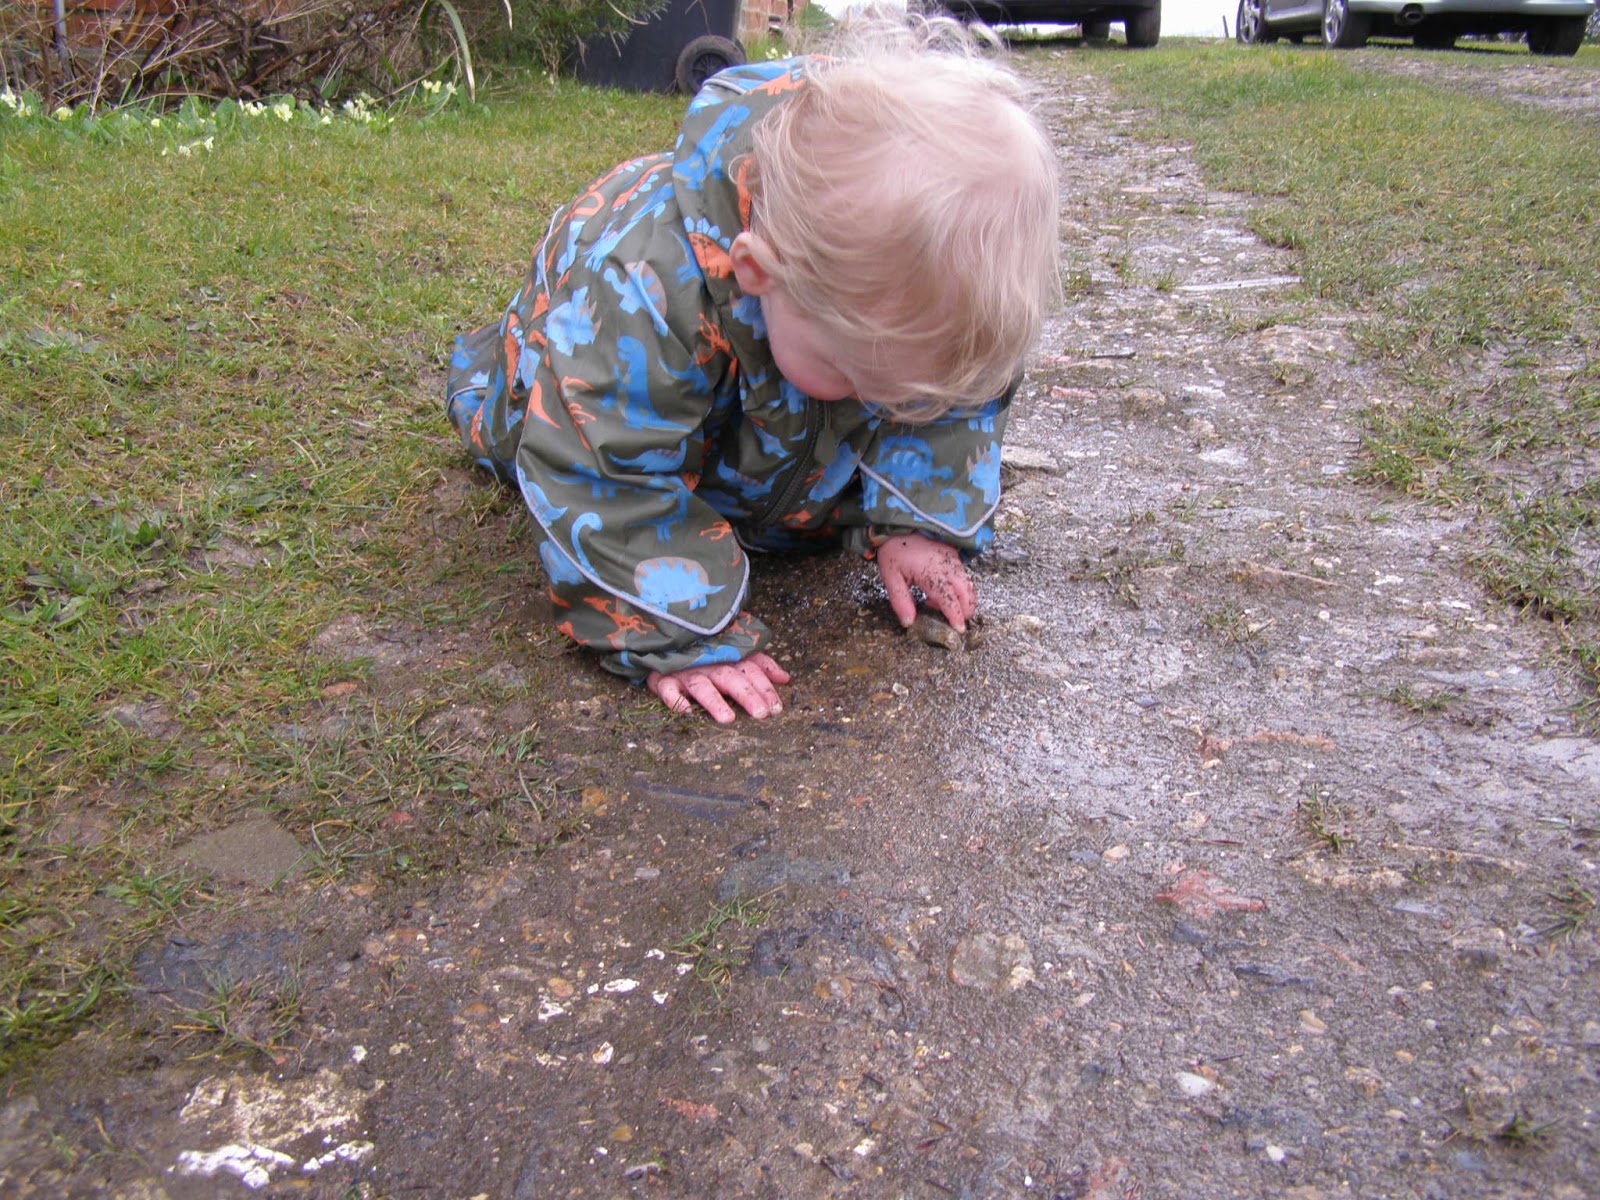 Mud Mud Marvellous Mud: Dirty Ditches and Puddle Play - 